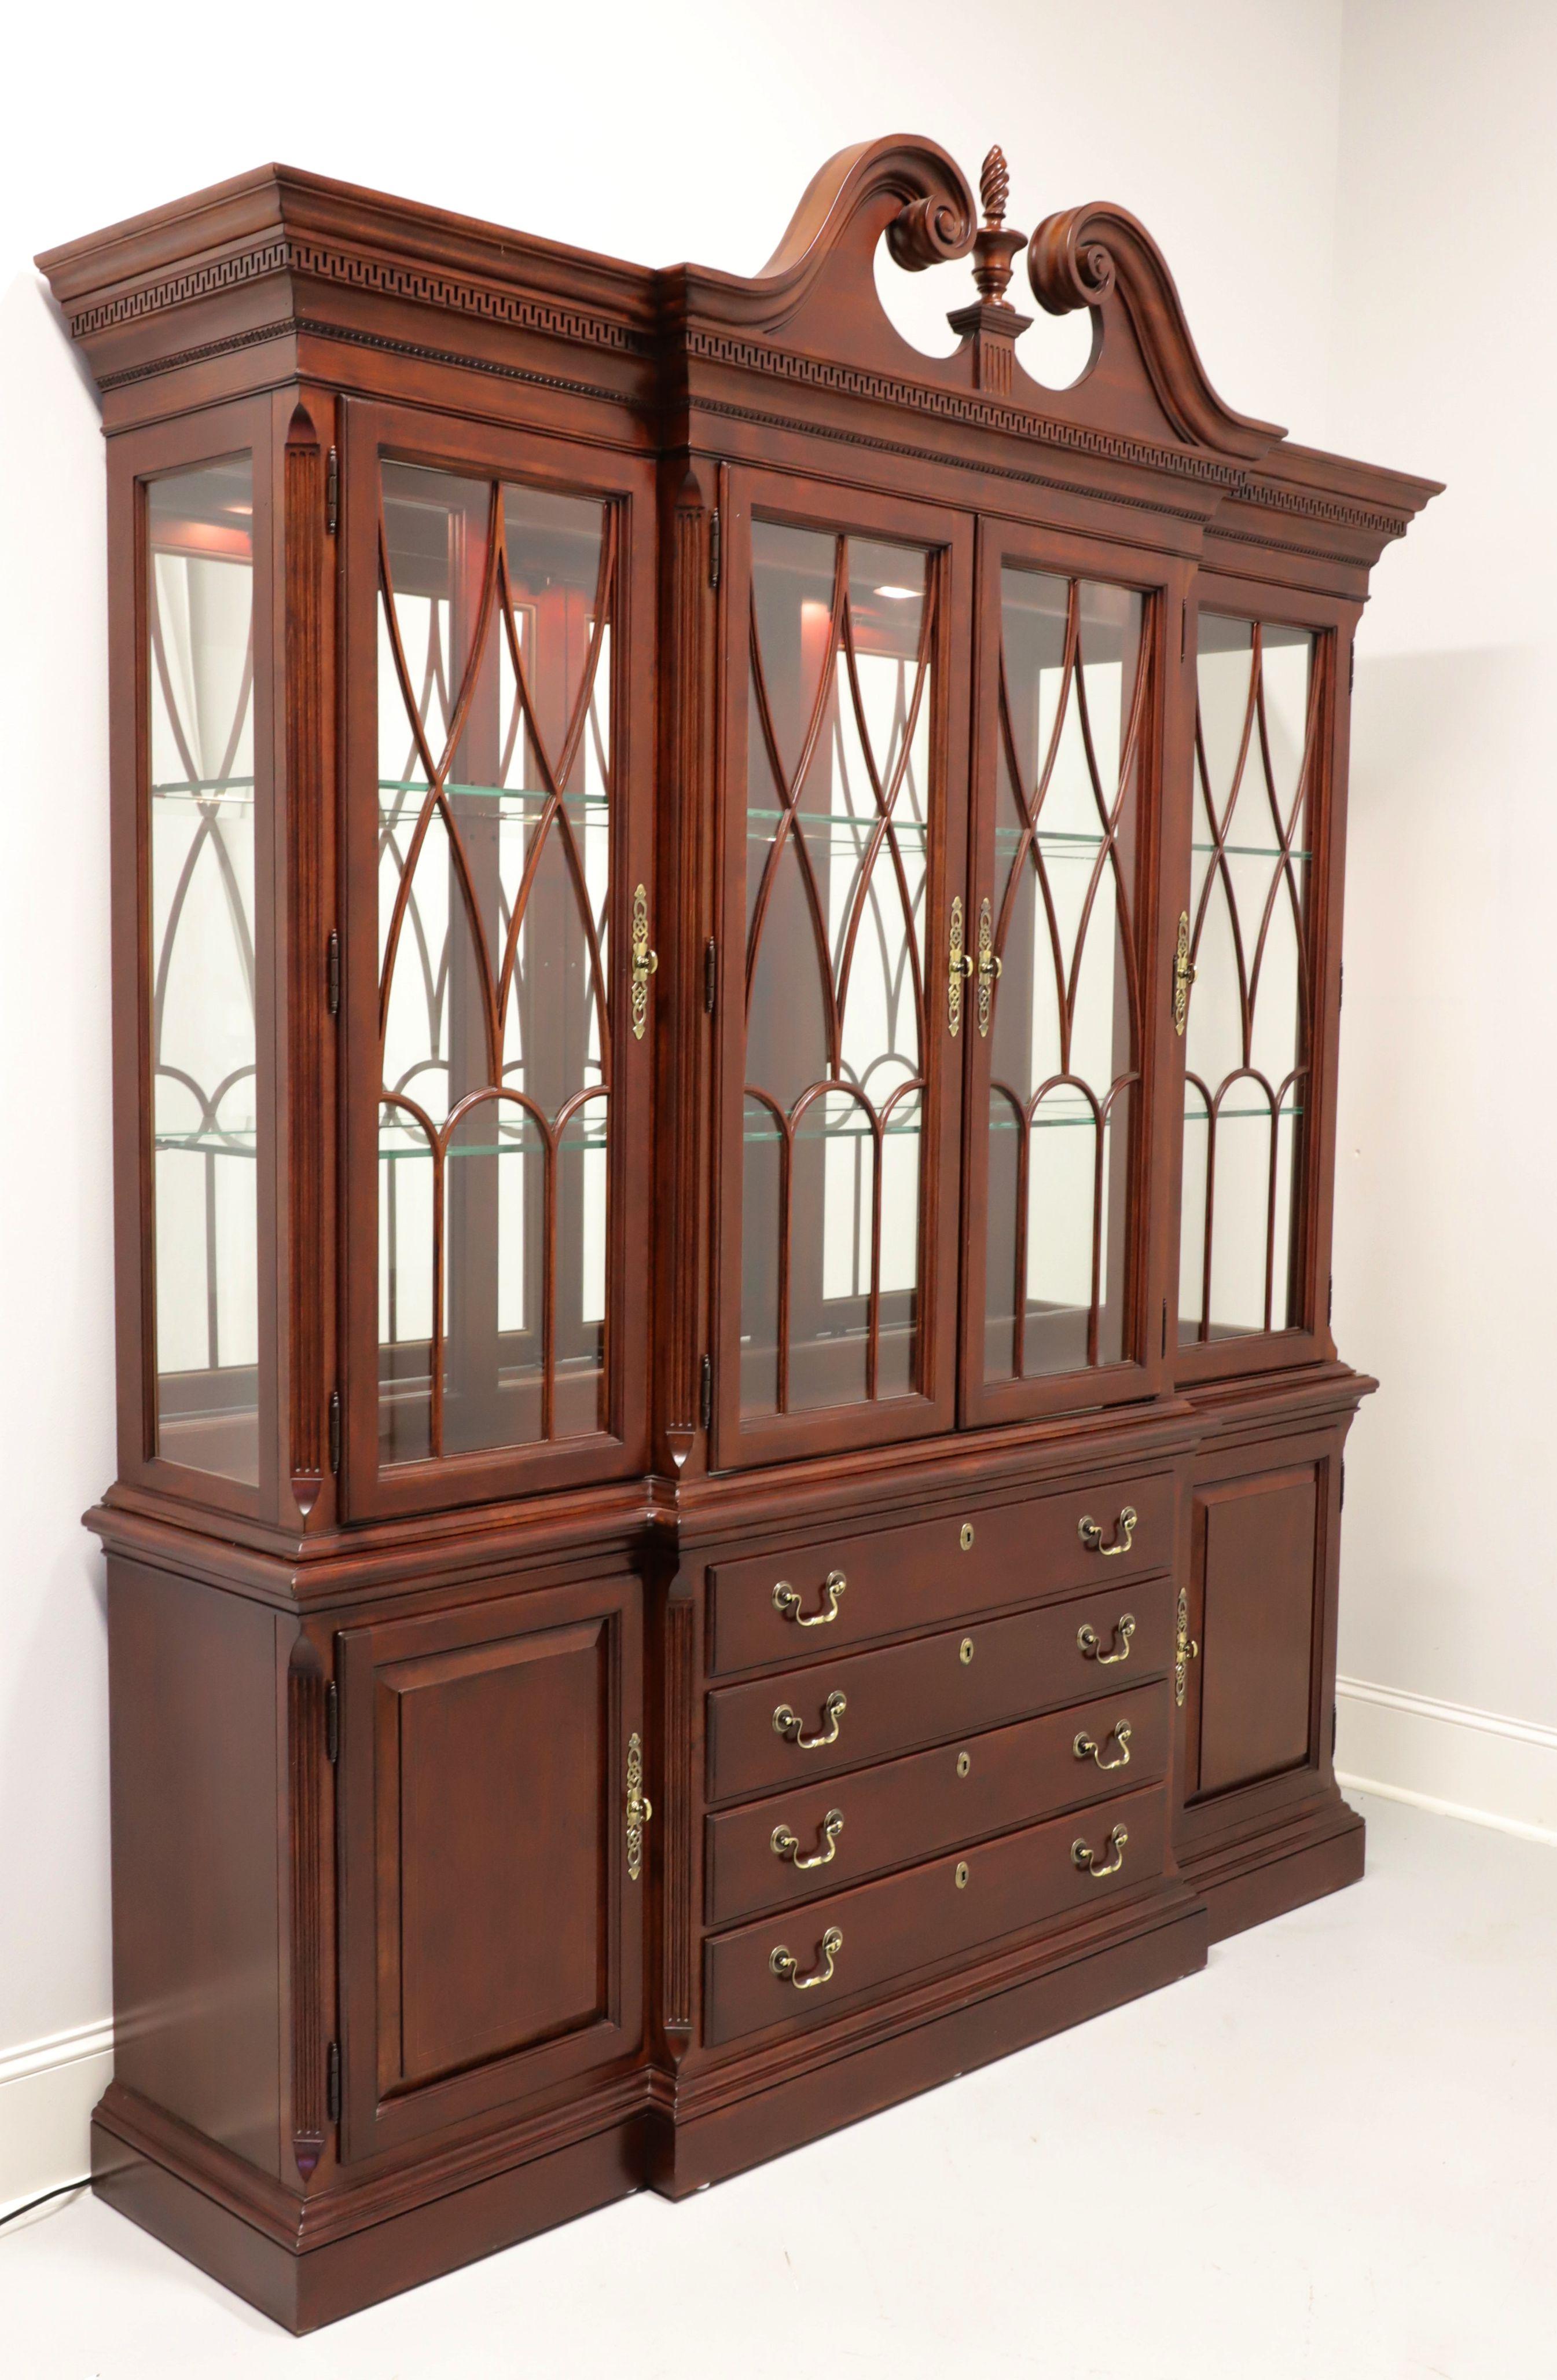 A Traditional style breakfront china cabinet by Pennsylvania House. Cherry with brass hardware, crown & dentil moulding, pediment to top with center finial, glass doors with fretwork panes, and ogee edge to solid base. Upper cabinet features Dual